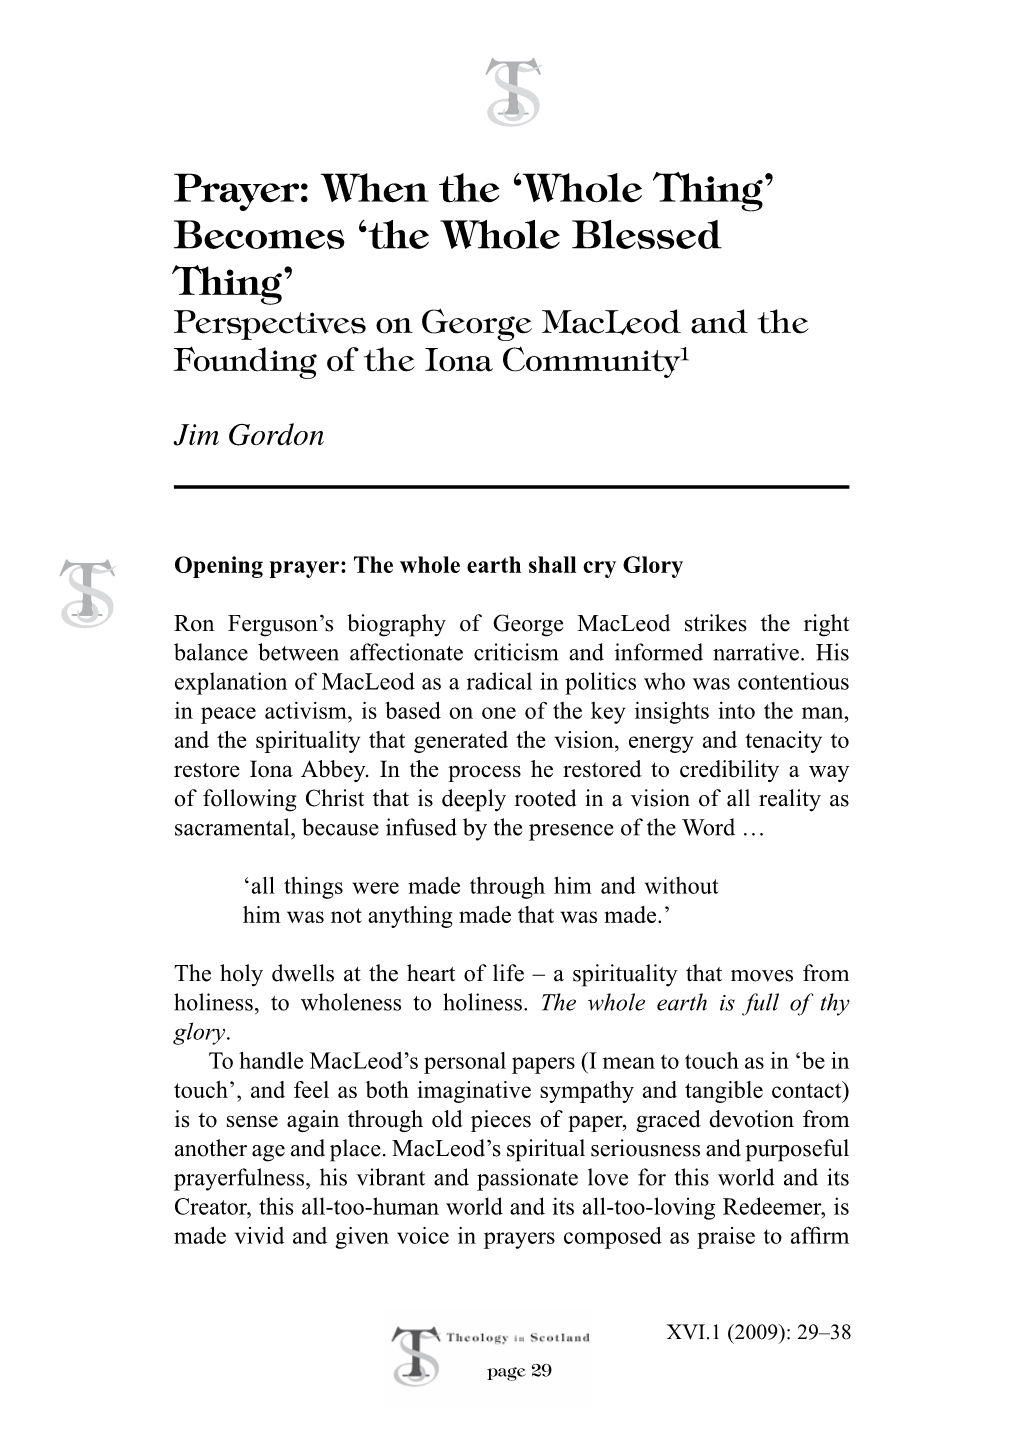 Prayer: When the 'Whole Thing' Becomes 'The Whole Blessed Thing'